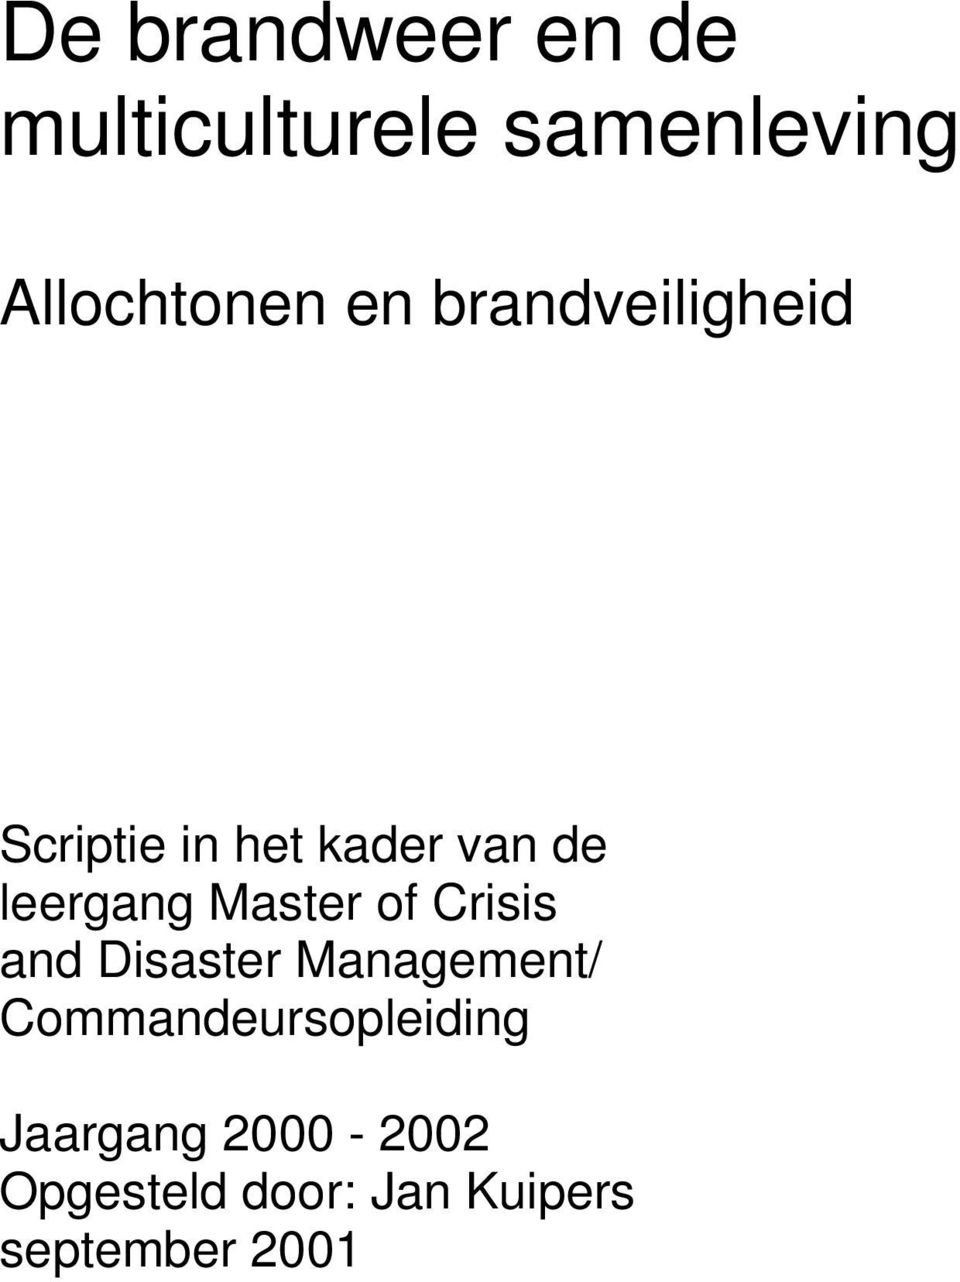 Master of Crisis and Disaster Management/